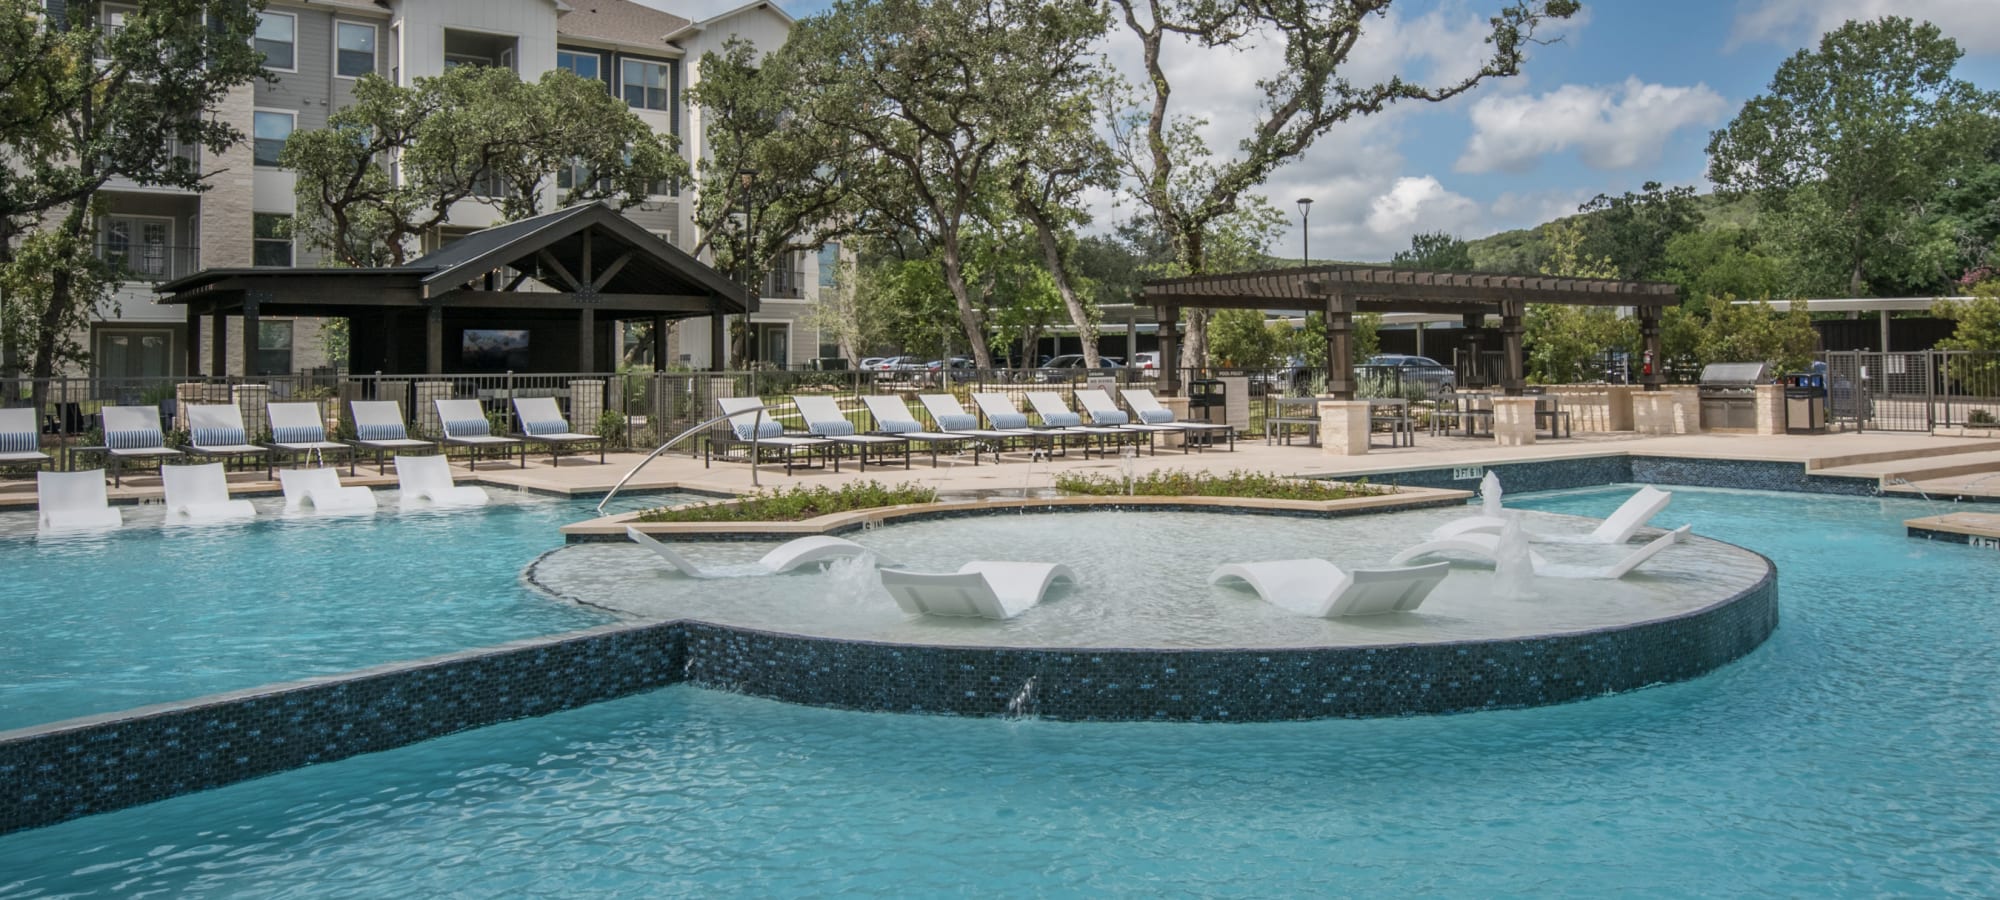 Apply to live at Marquis Dominion in San Antonio, Texas